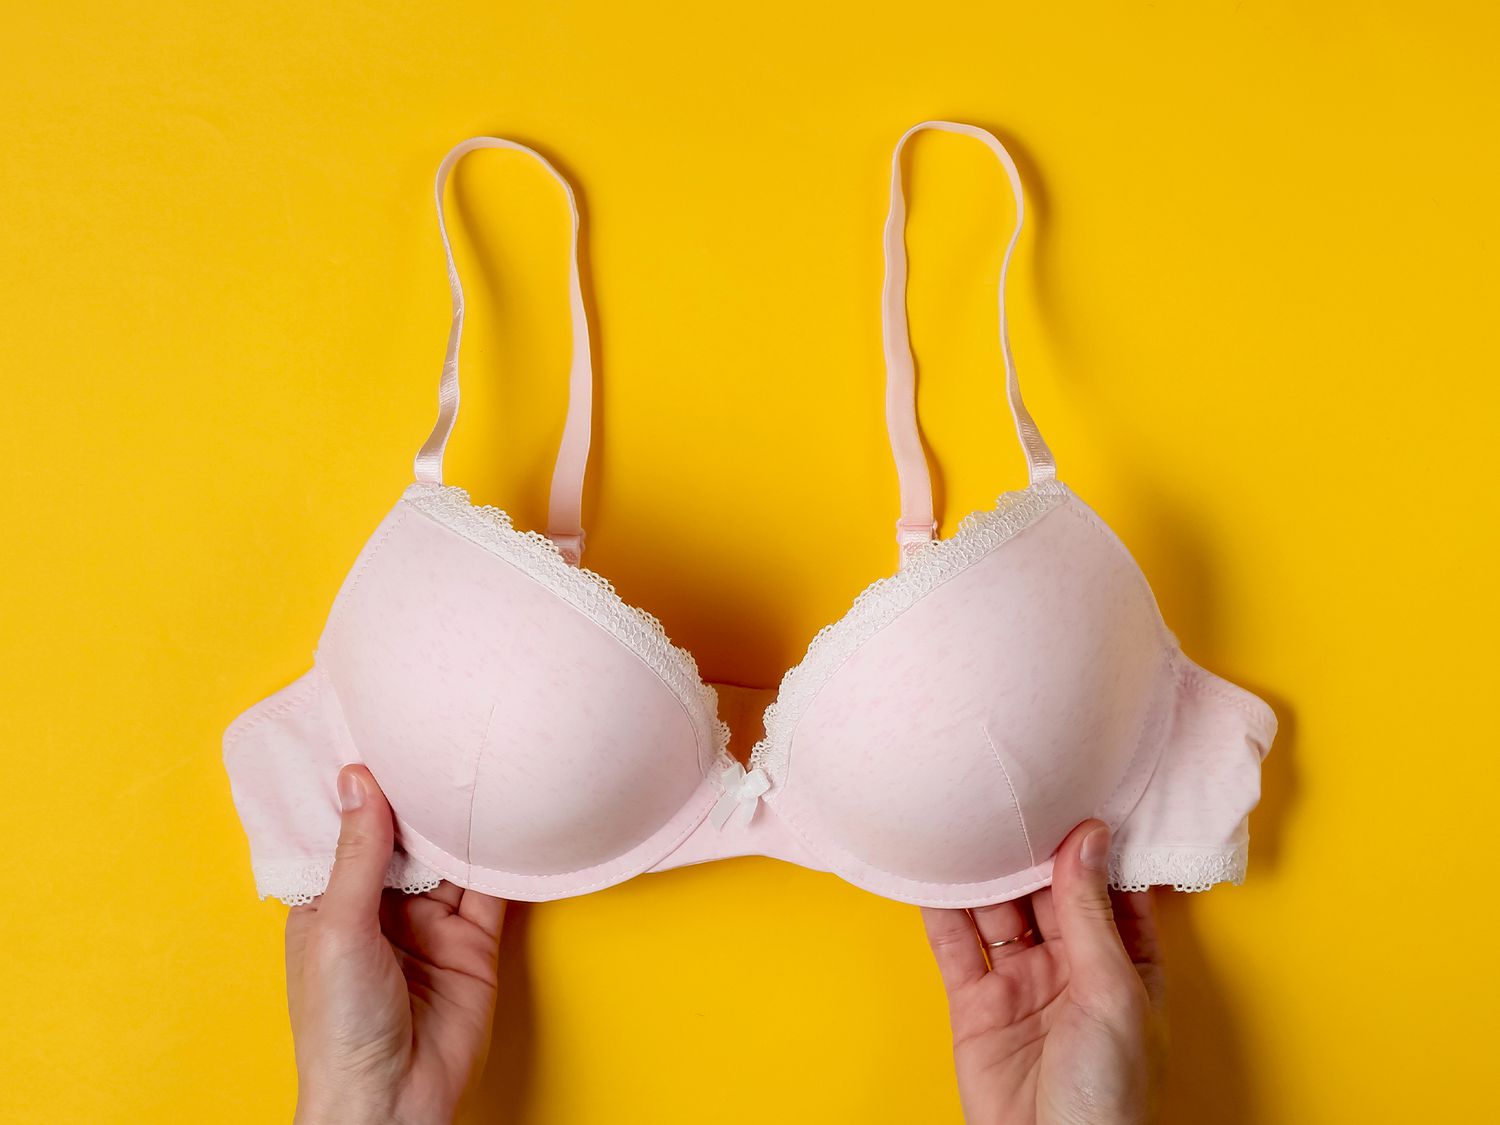 How Should An Underwire Bra Fit